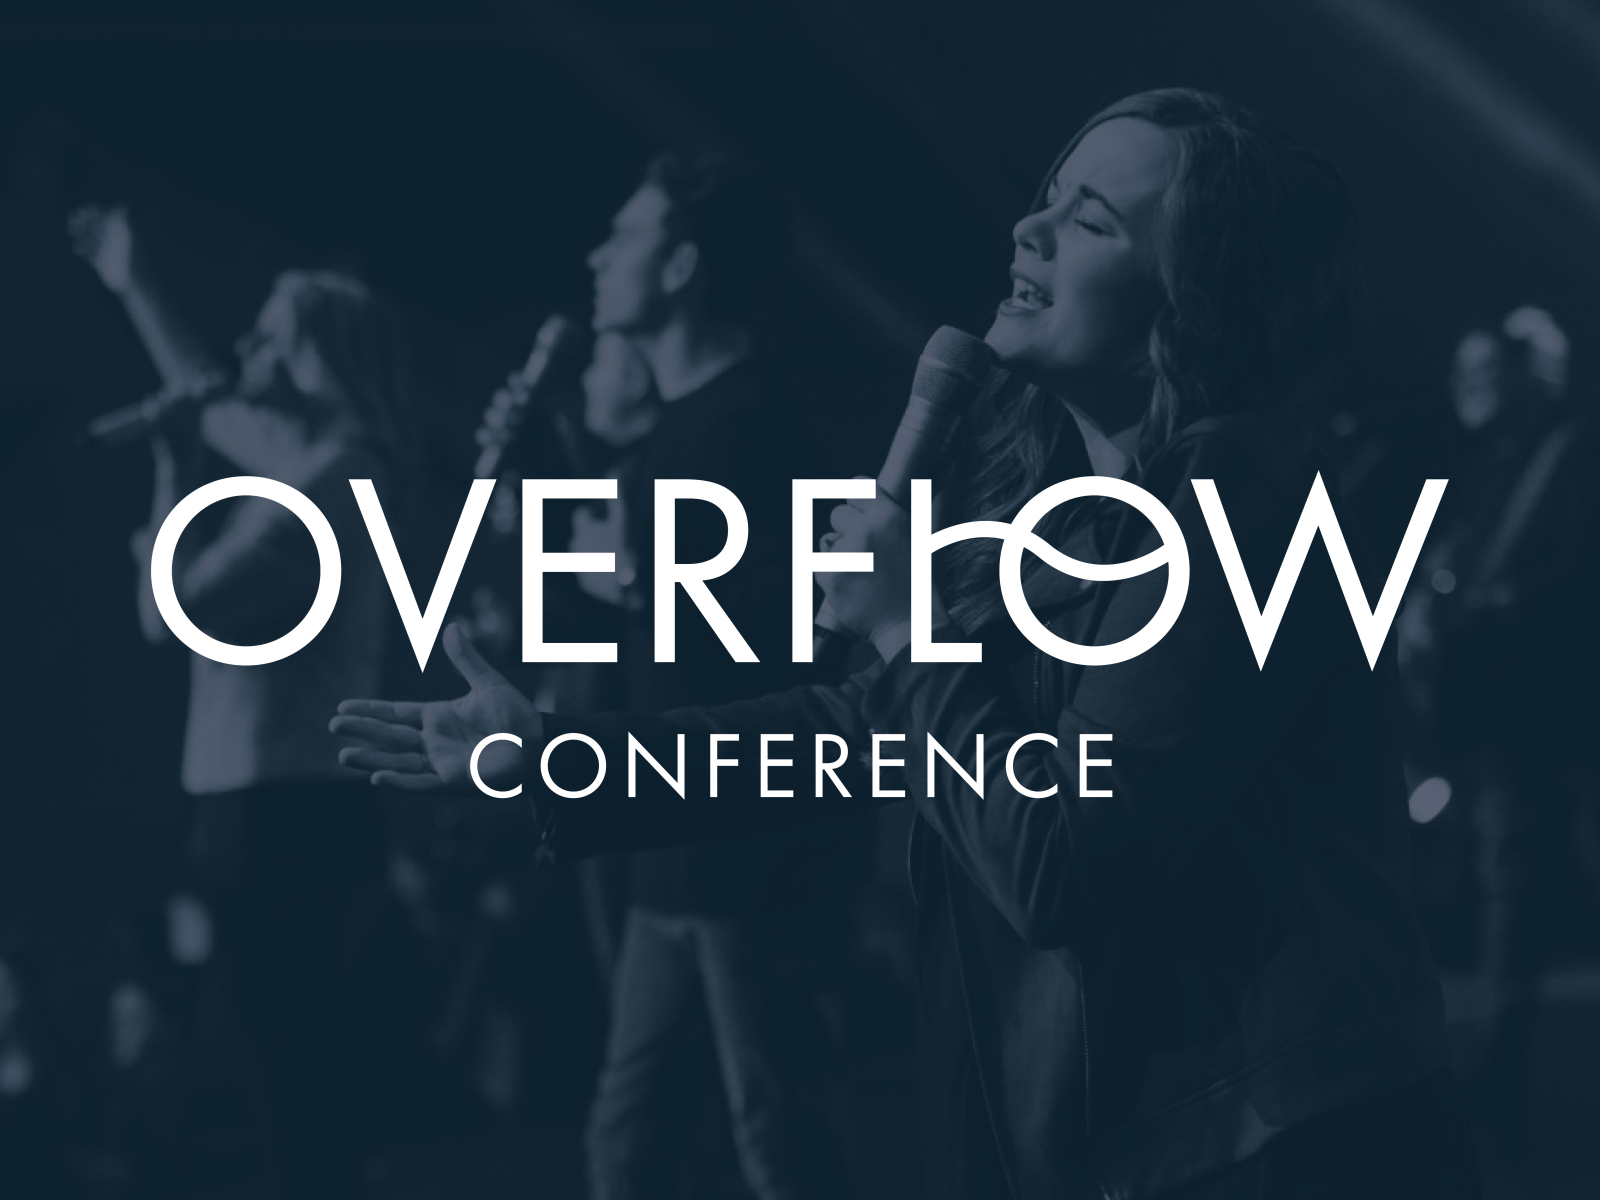 Overflow Conference Logo by Heath Vester on Dribbble